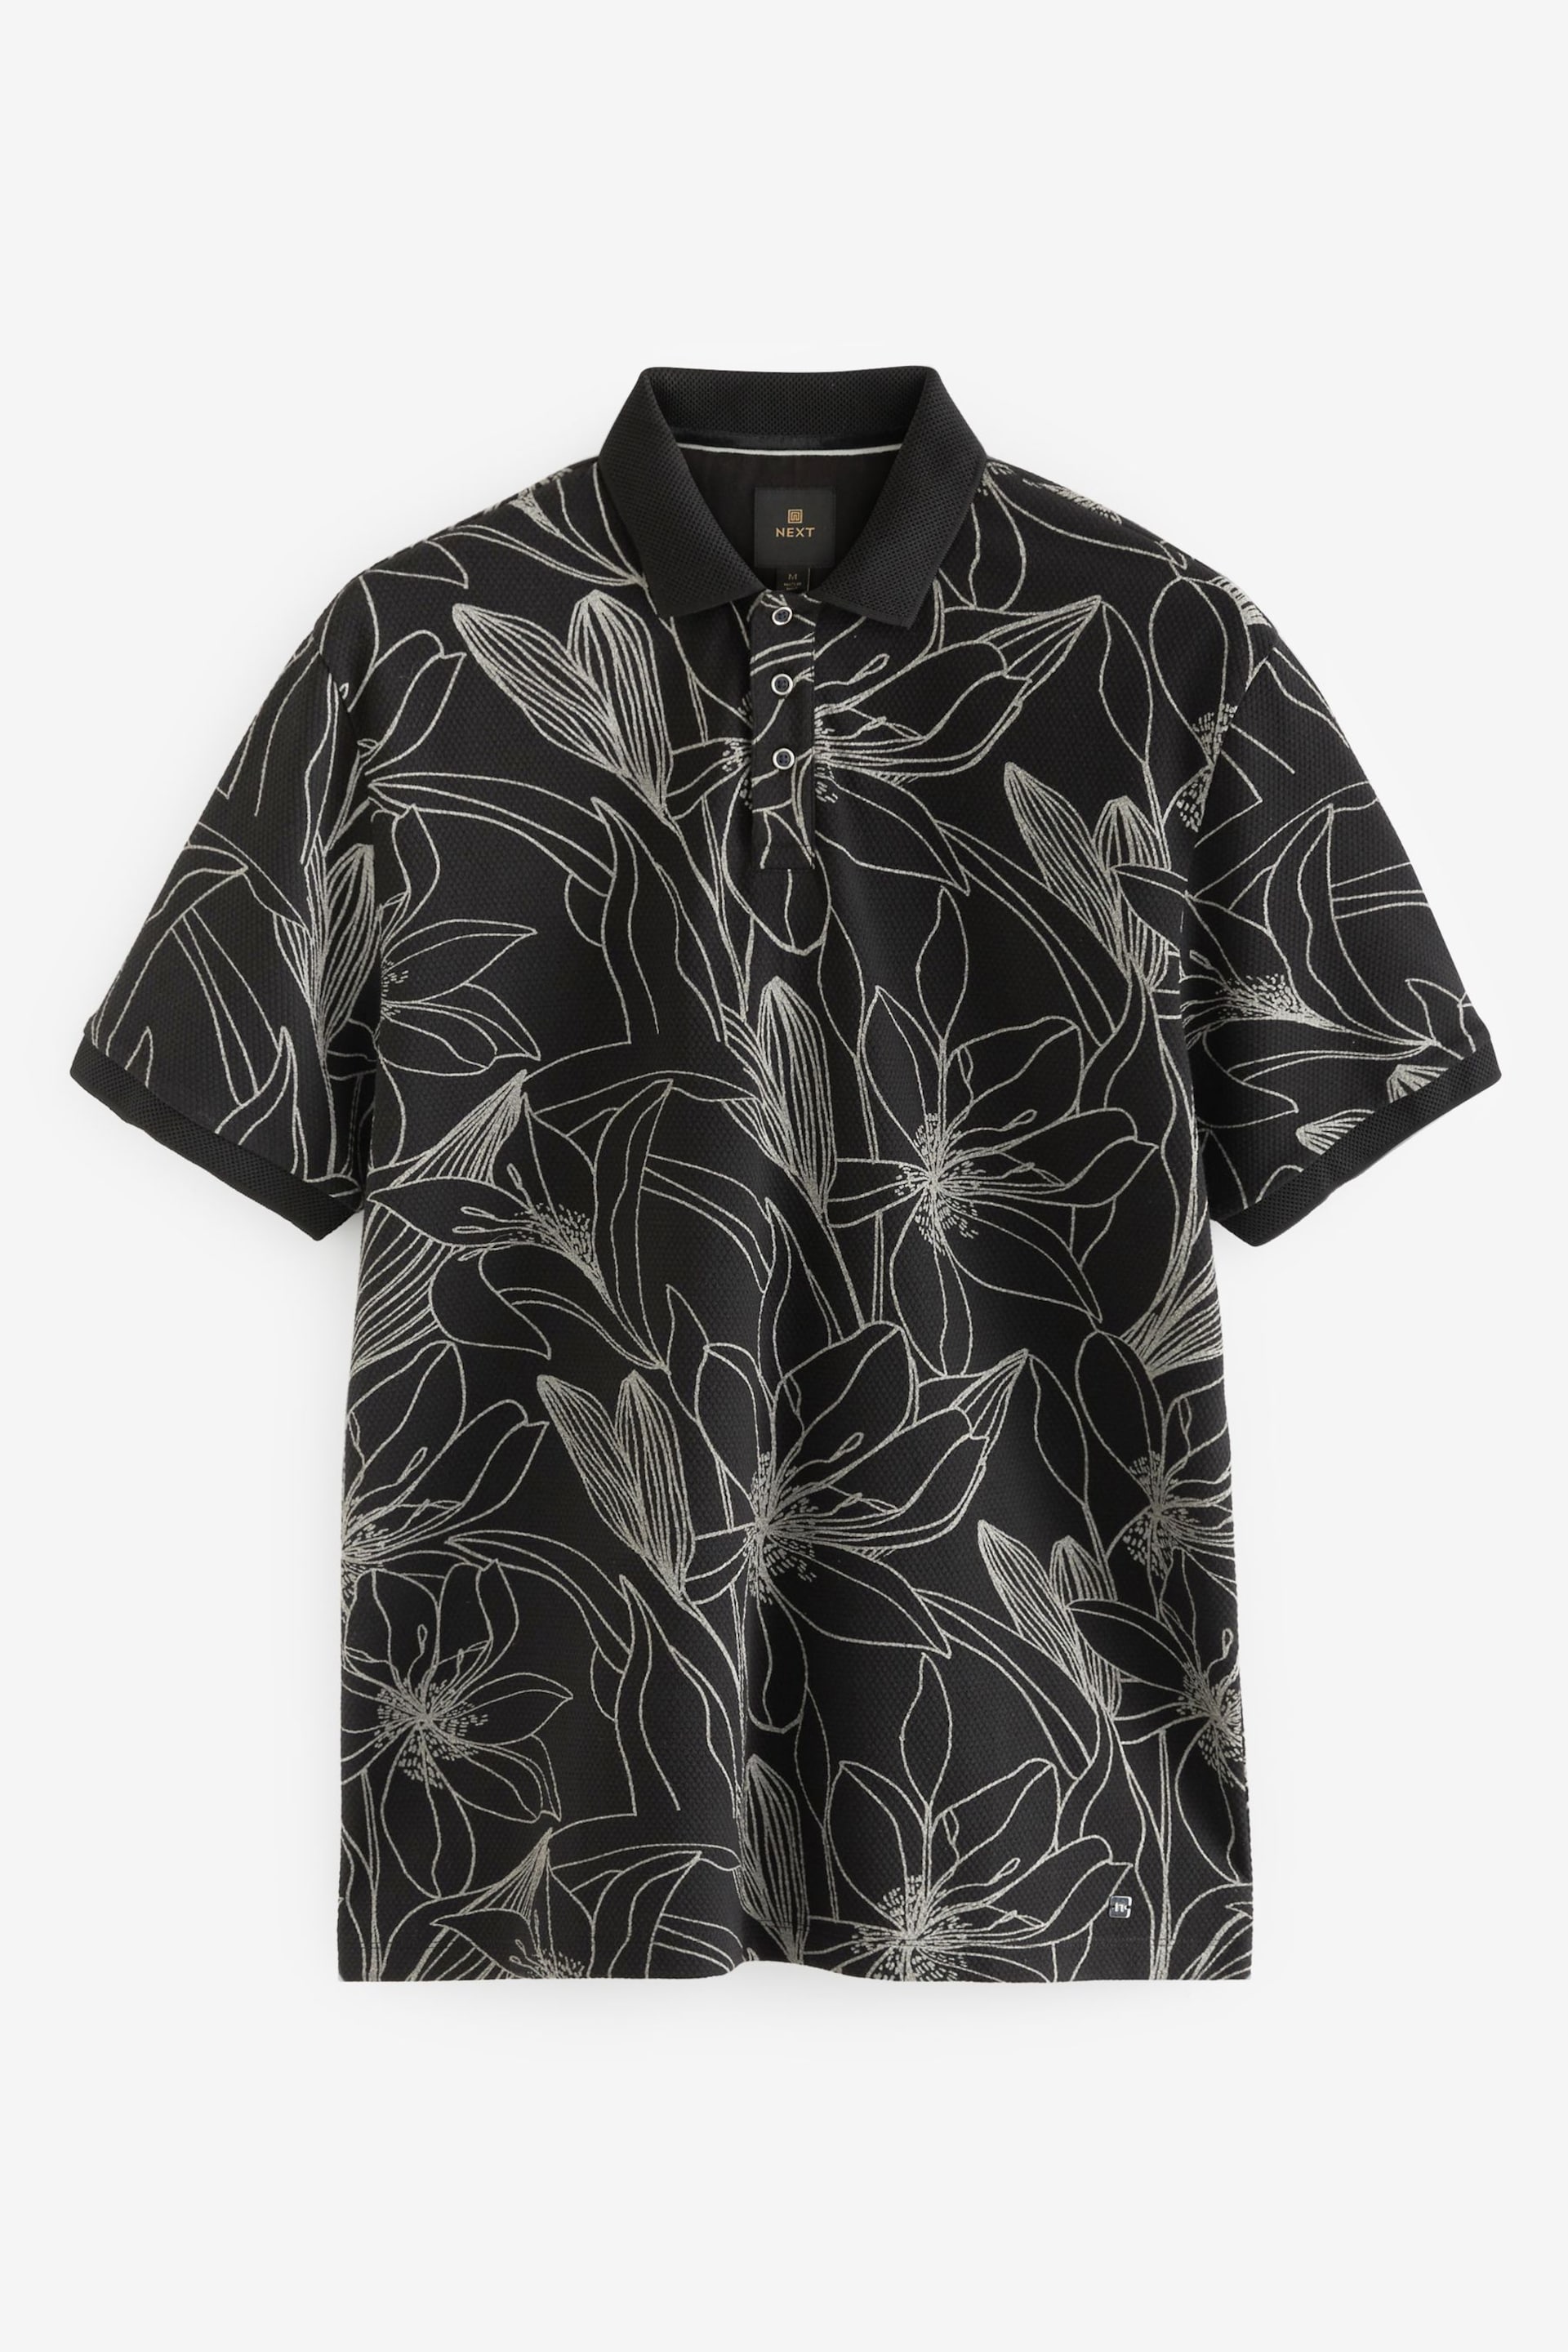 Black/White Floral Print Textured Polo Shirt - Image 6 of 8